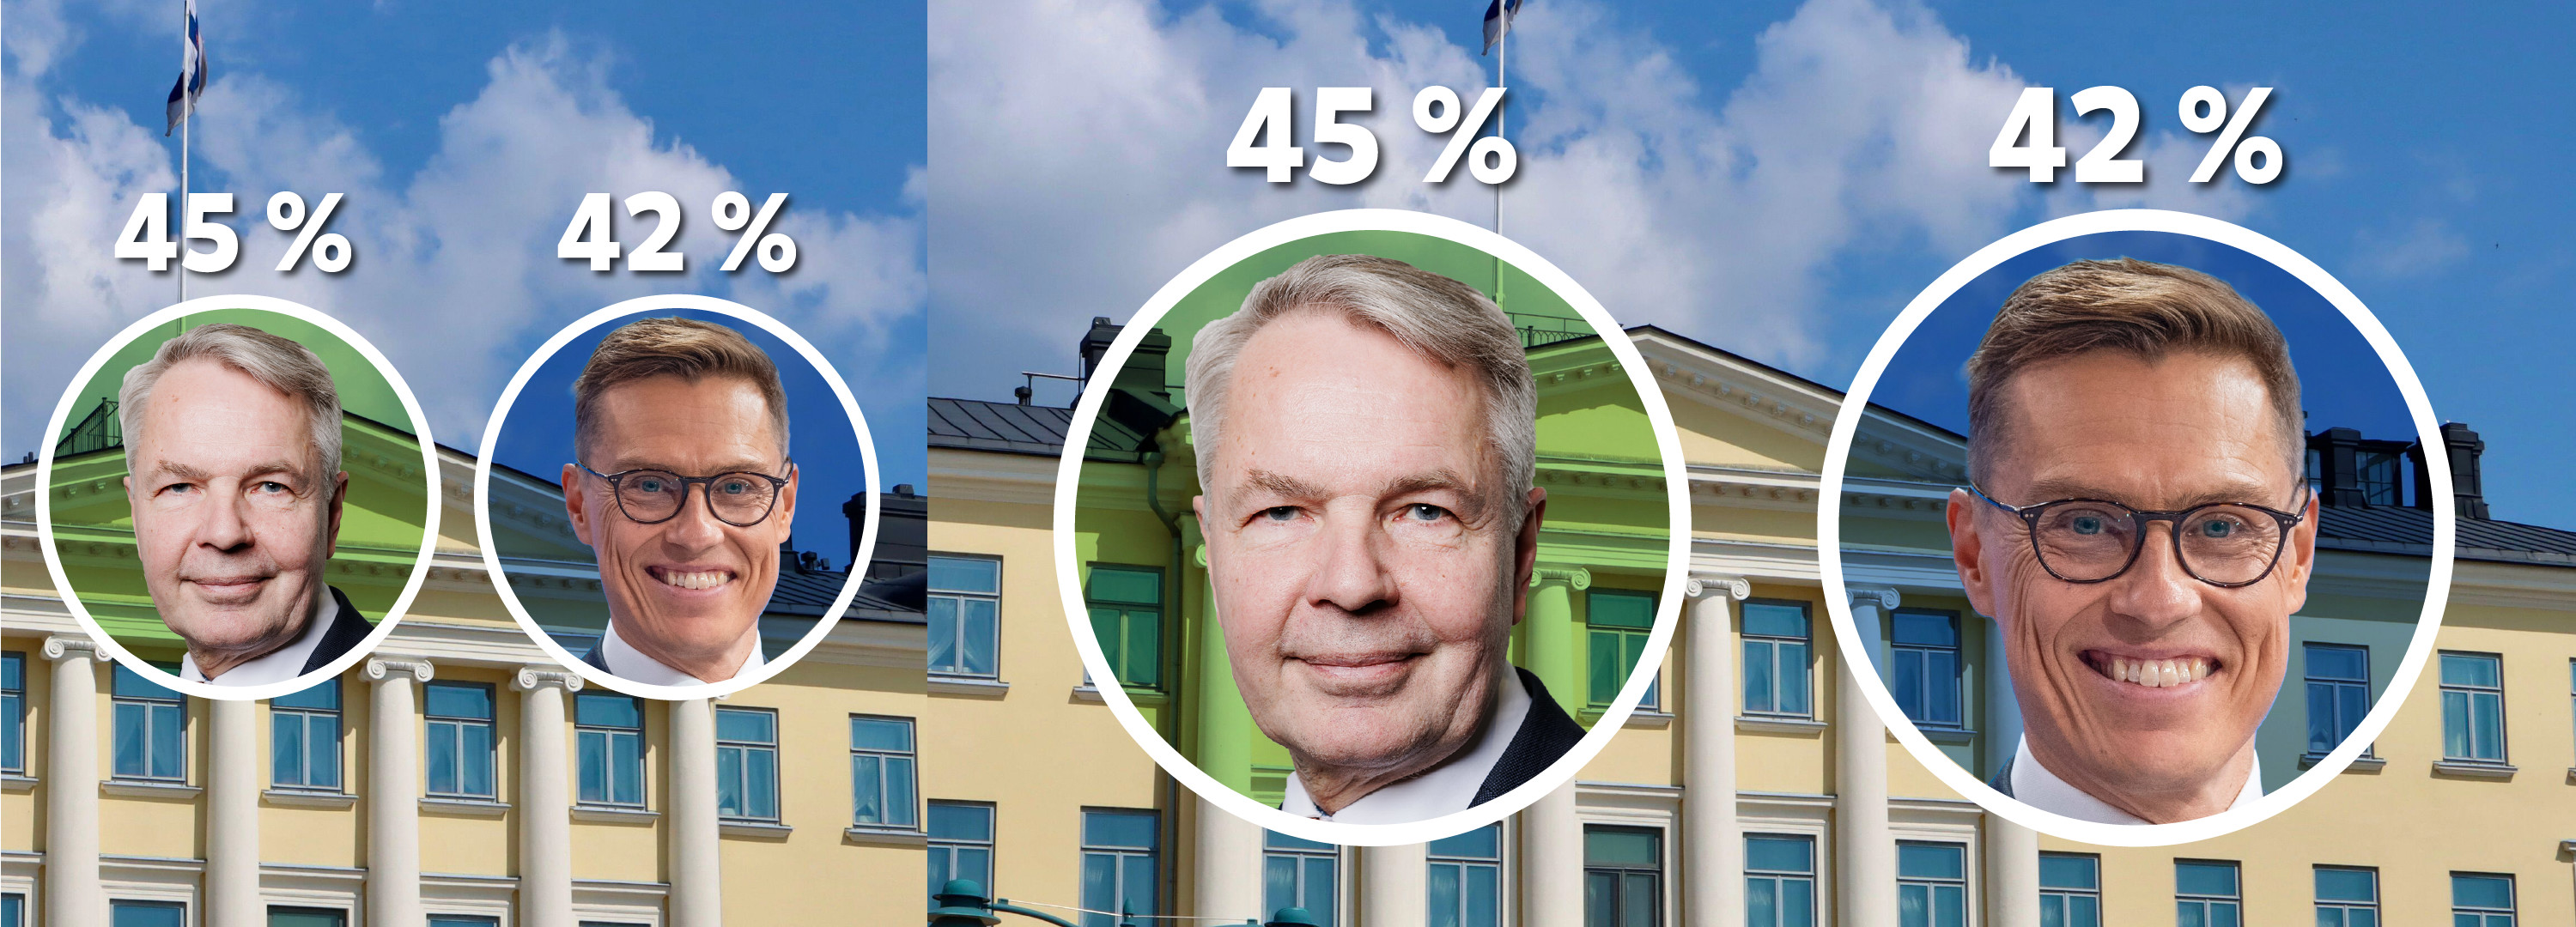 In Yle’s survey, Stubb and Haavisto are at the top